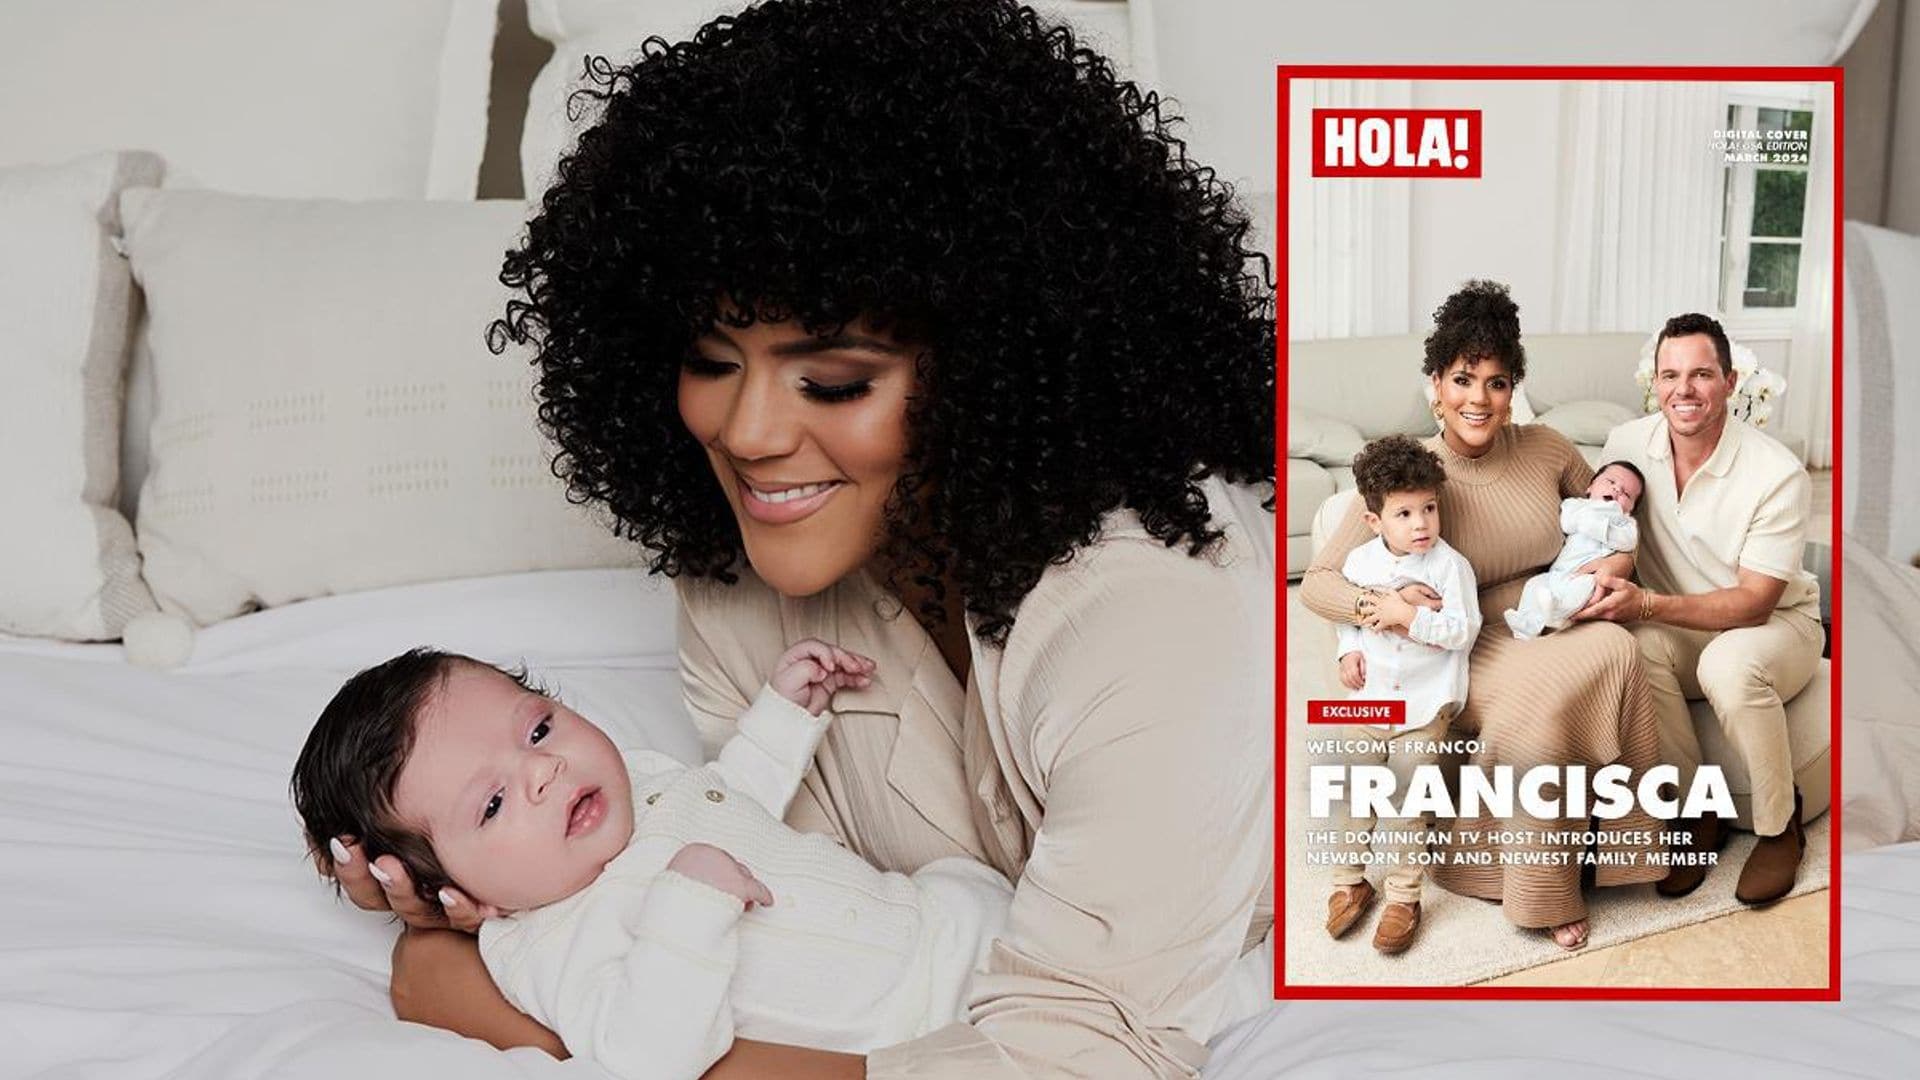 Welcome, Franco! Francisca introduces her newborn son and newest family member